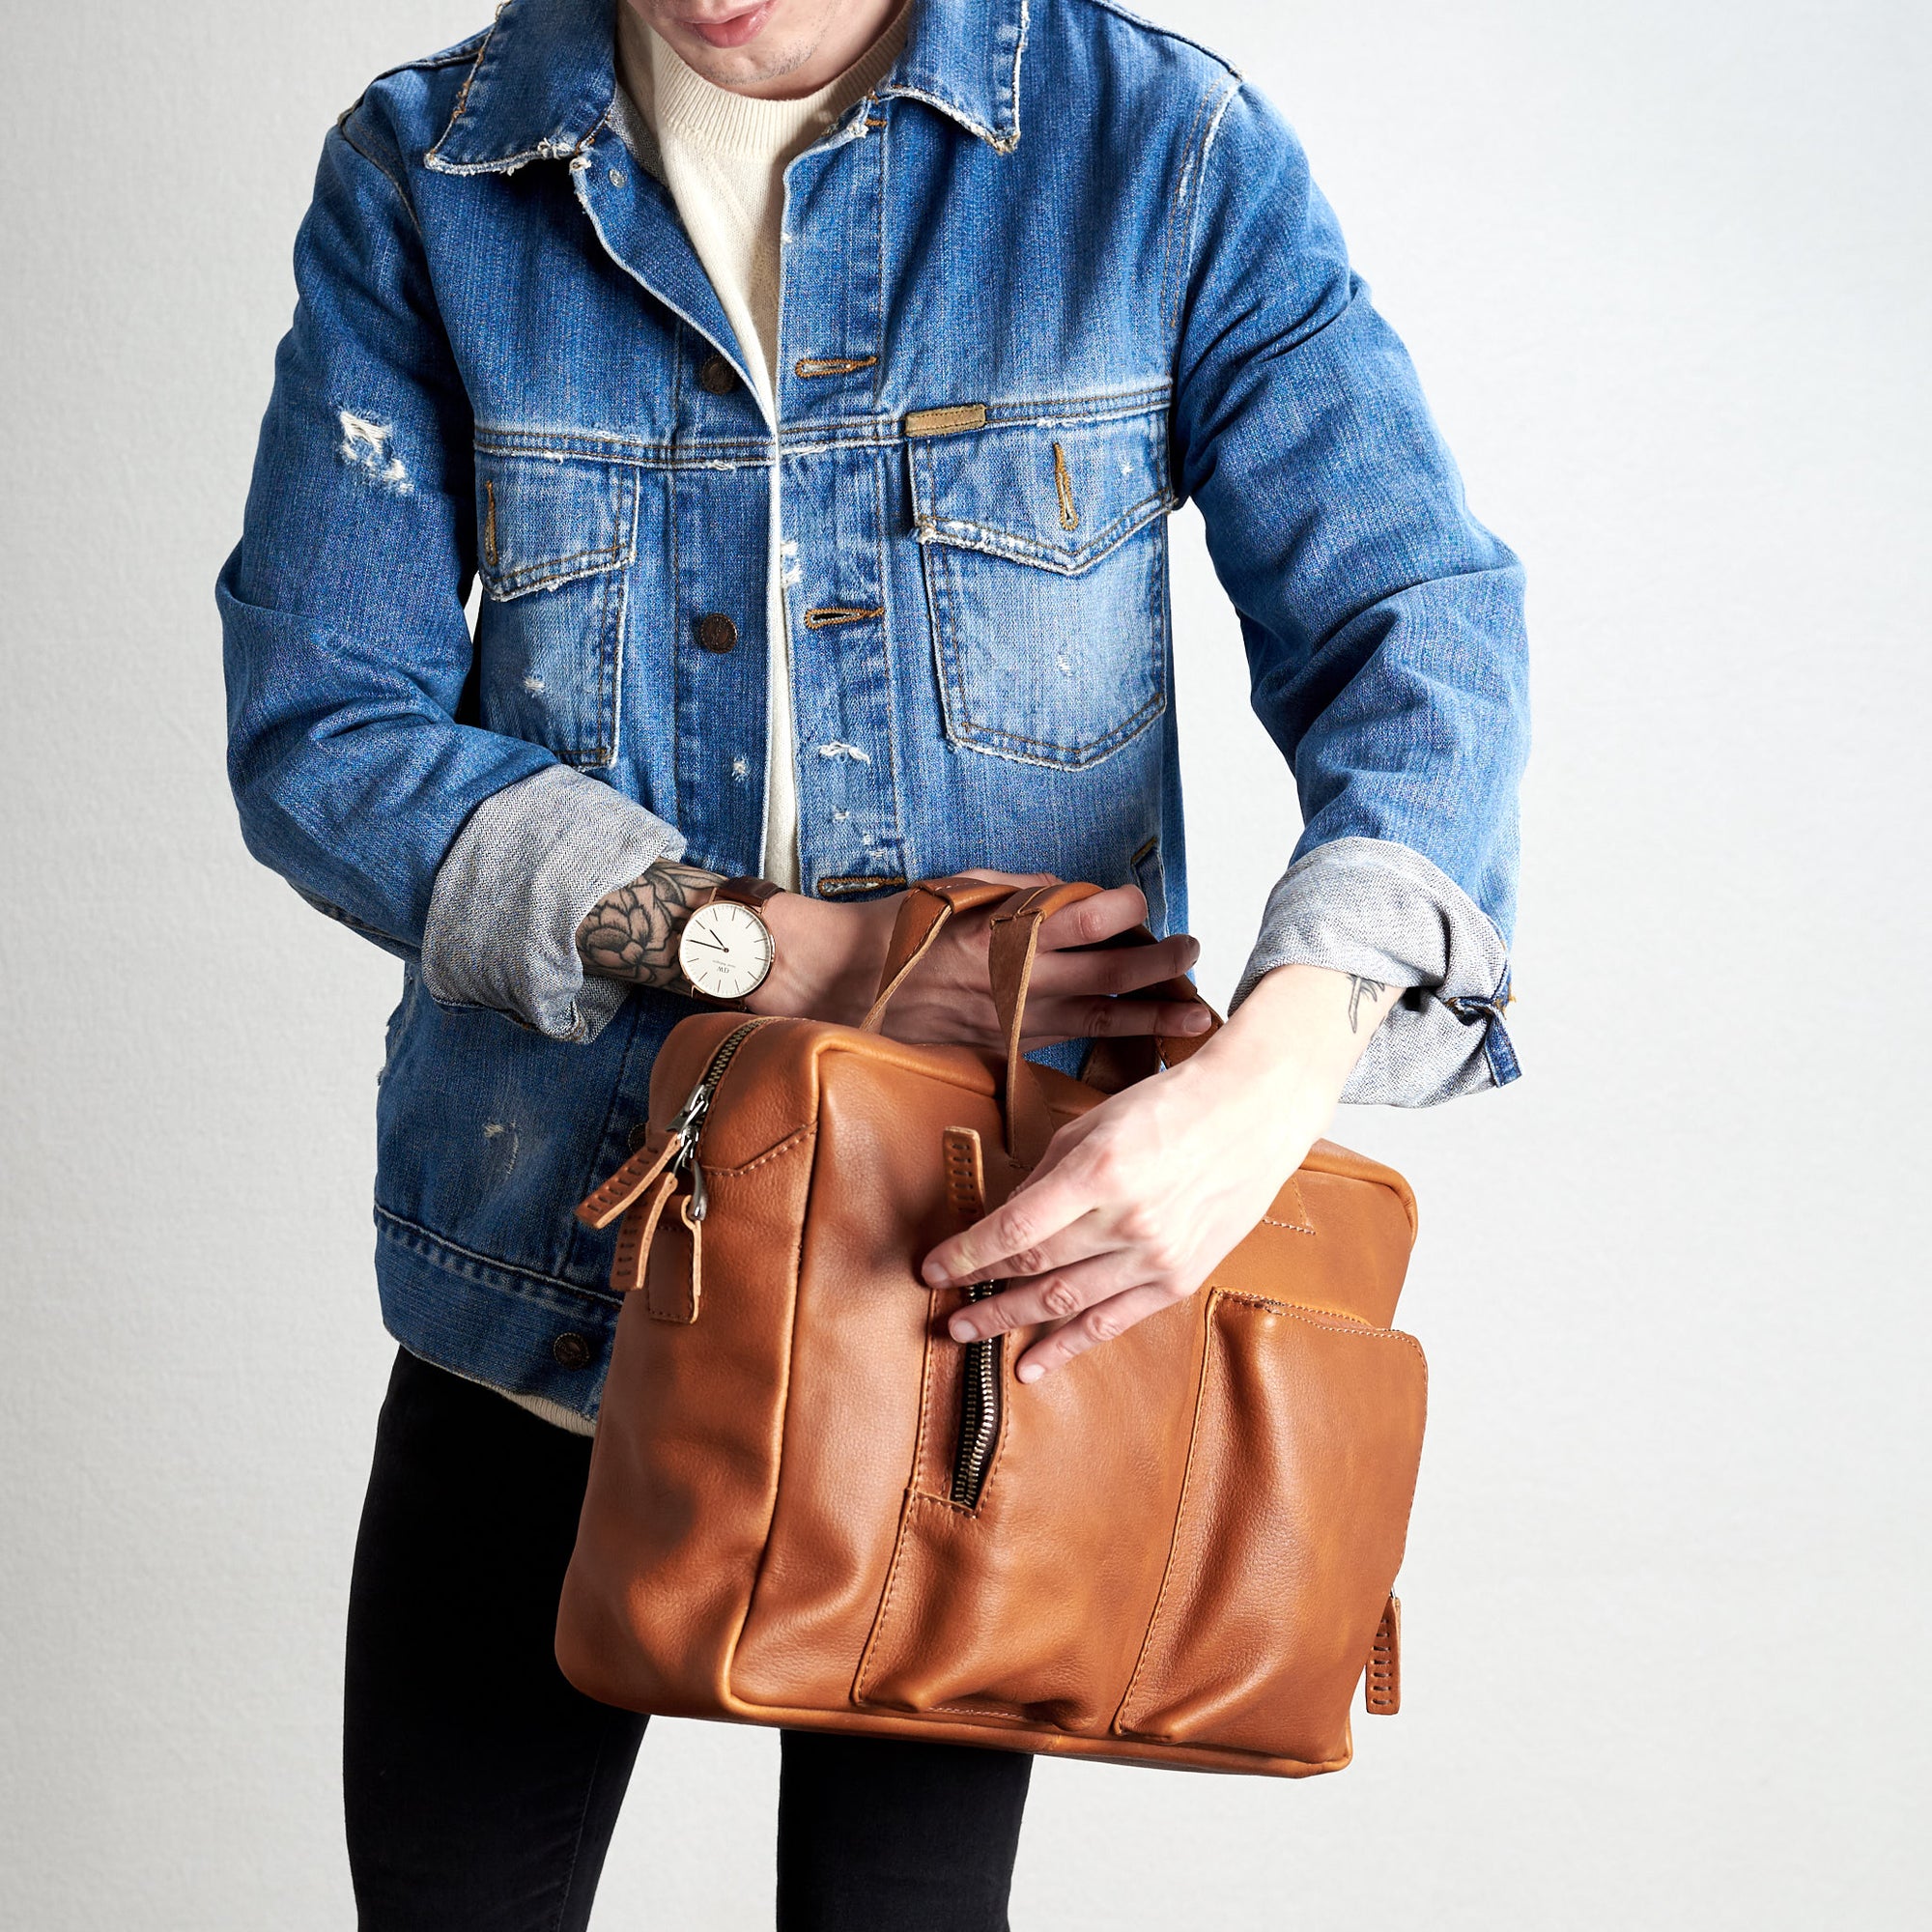 Style from pocket use. Tan Equz messenger bag by Capra Leather. 